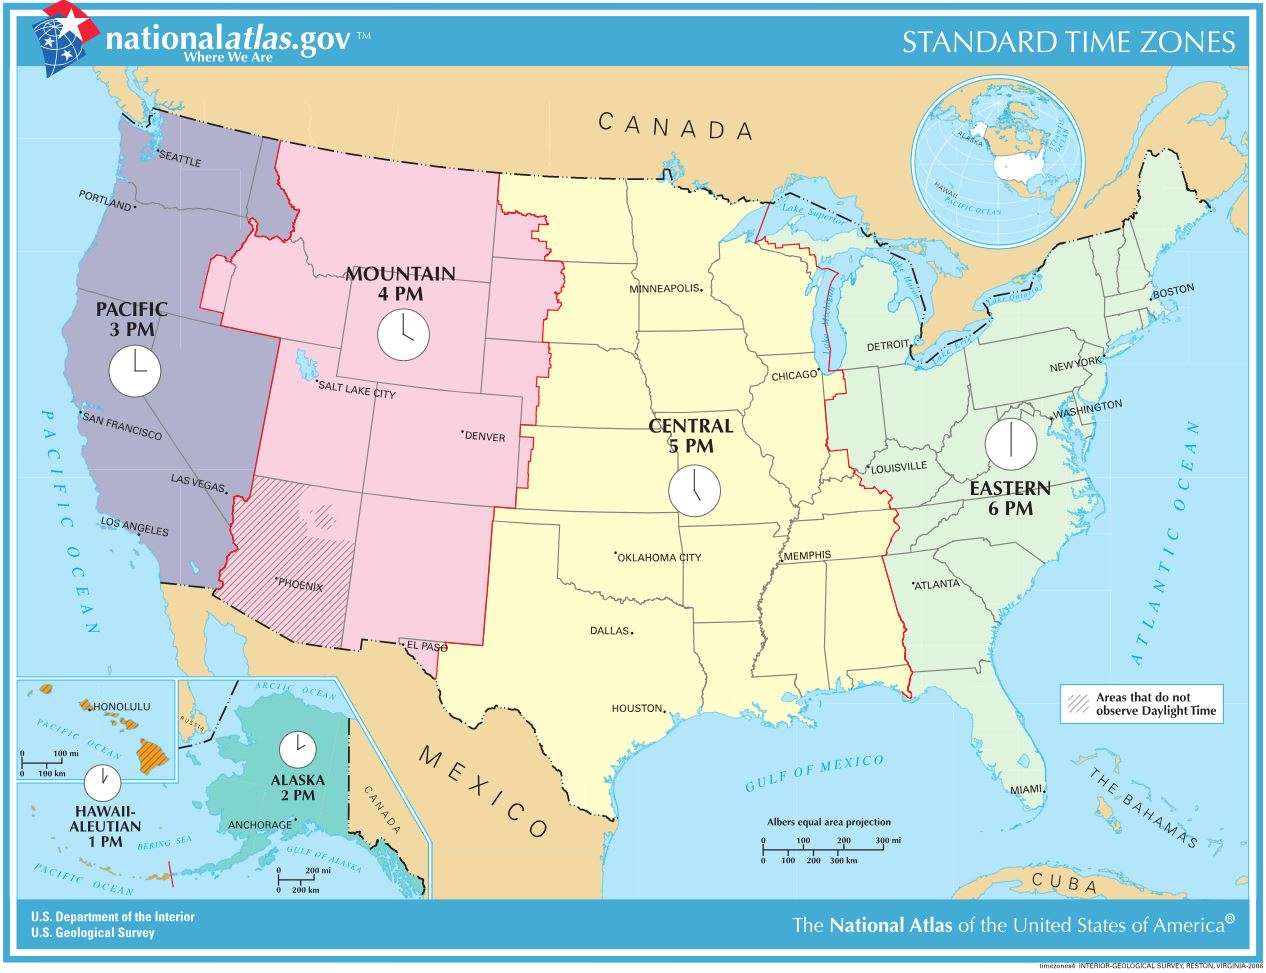 Time Zones of USA